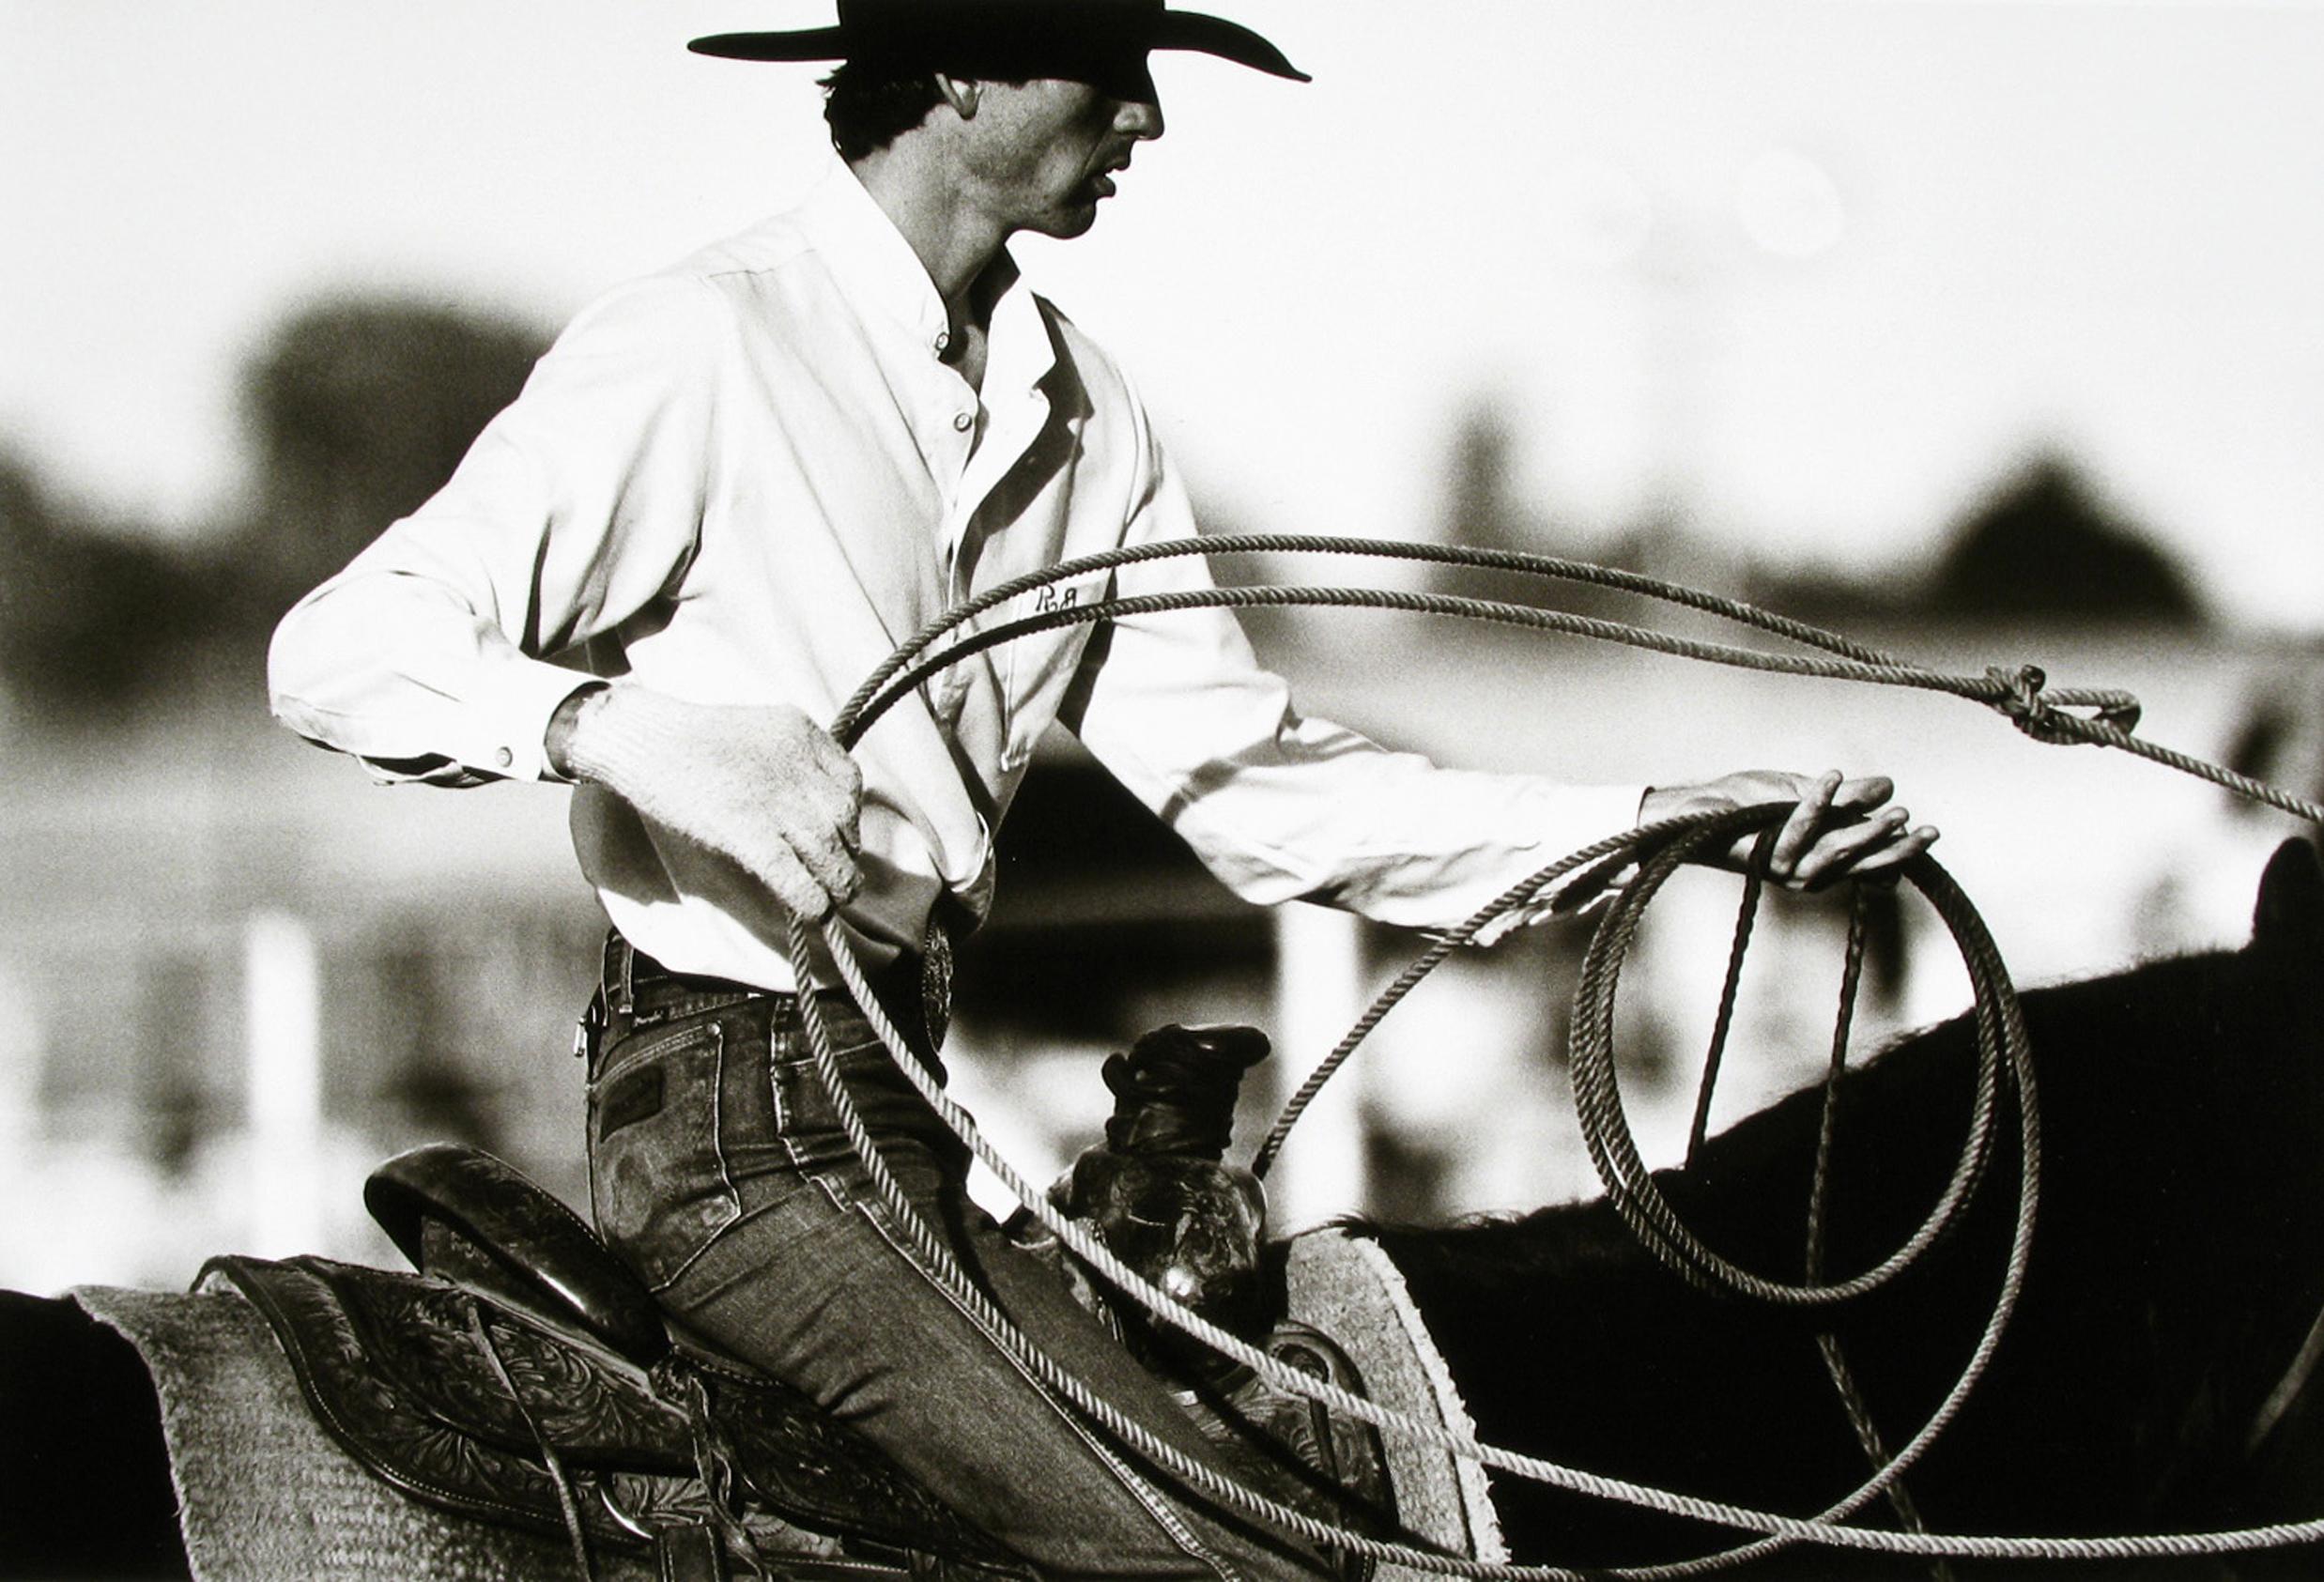 Norman Mauskopf, Brawley, California 1984, (from the Rodeo book), gelatin silver print, paper size: 16x20". matted: 22x28". Norman Mauskopf’s first book, Rodeo, was published in 1985, and looks into the lives of professional rodeo cowboys. About the